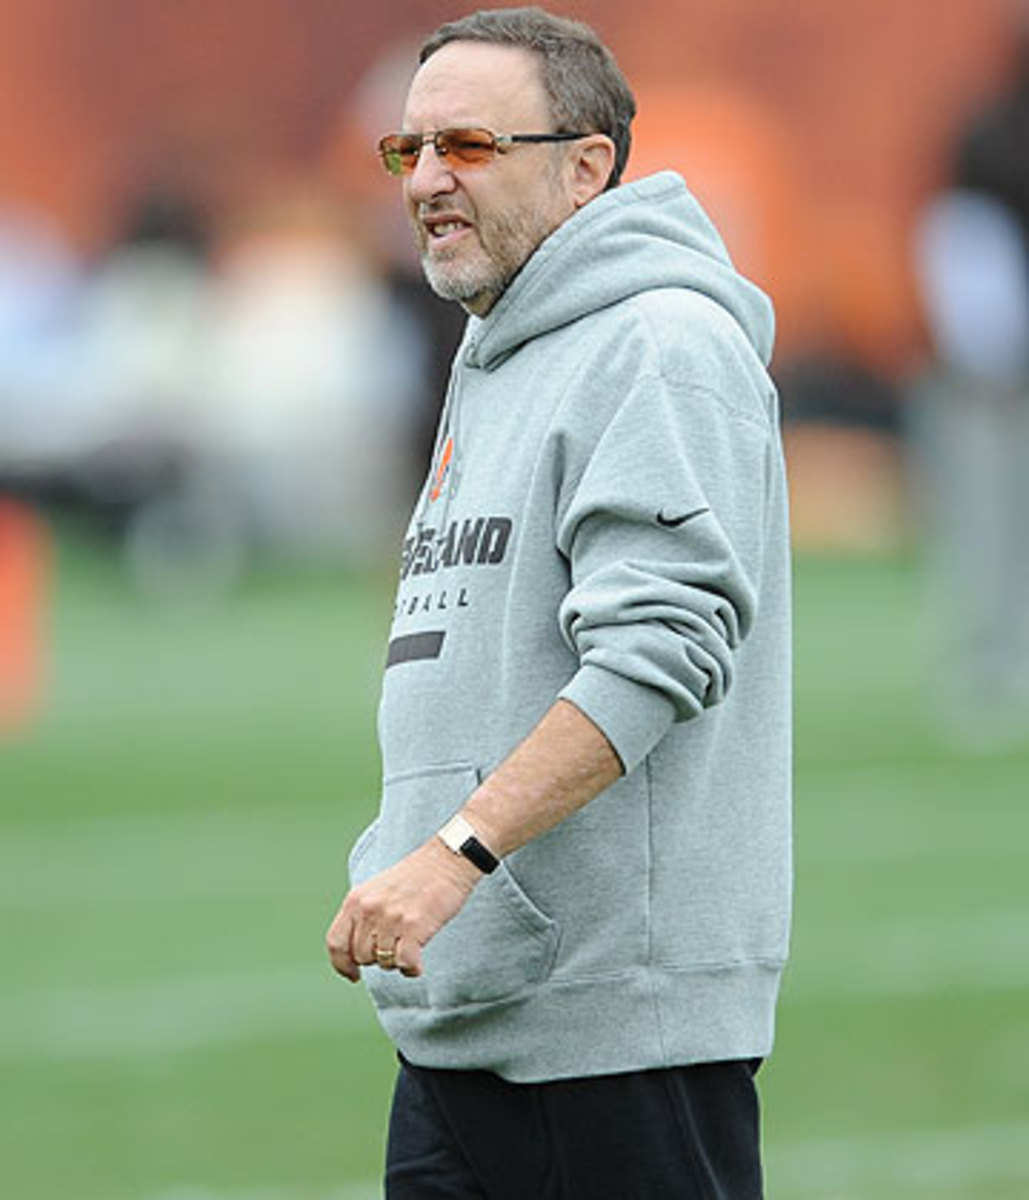 Before he was Browns CEO in 2012-13, Joe Banner worked for the Eagles for 18 seasons. (David Dermer/Getty Images)